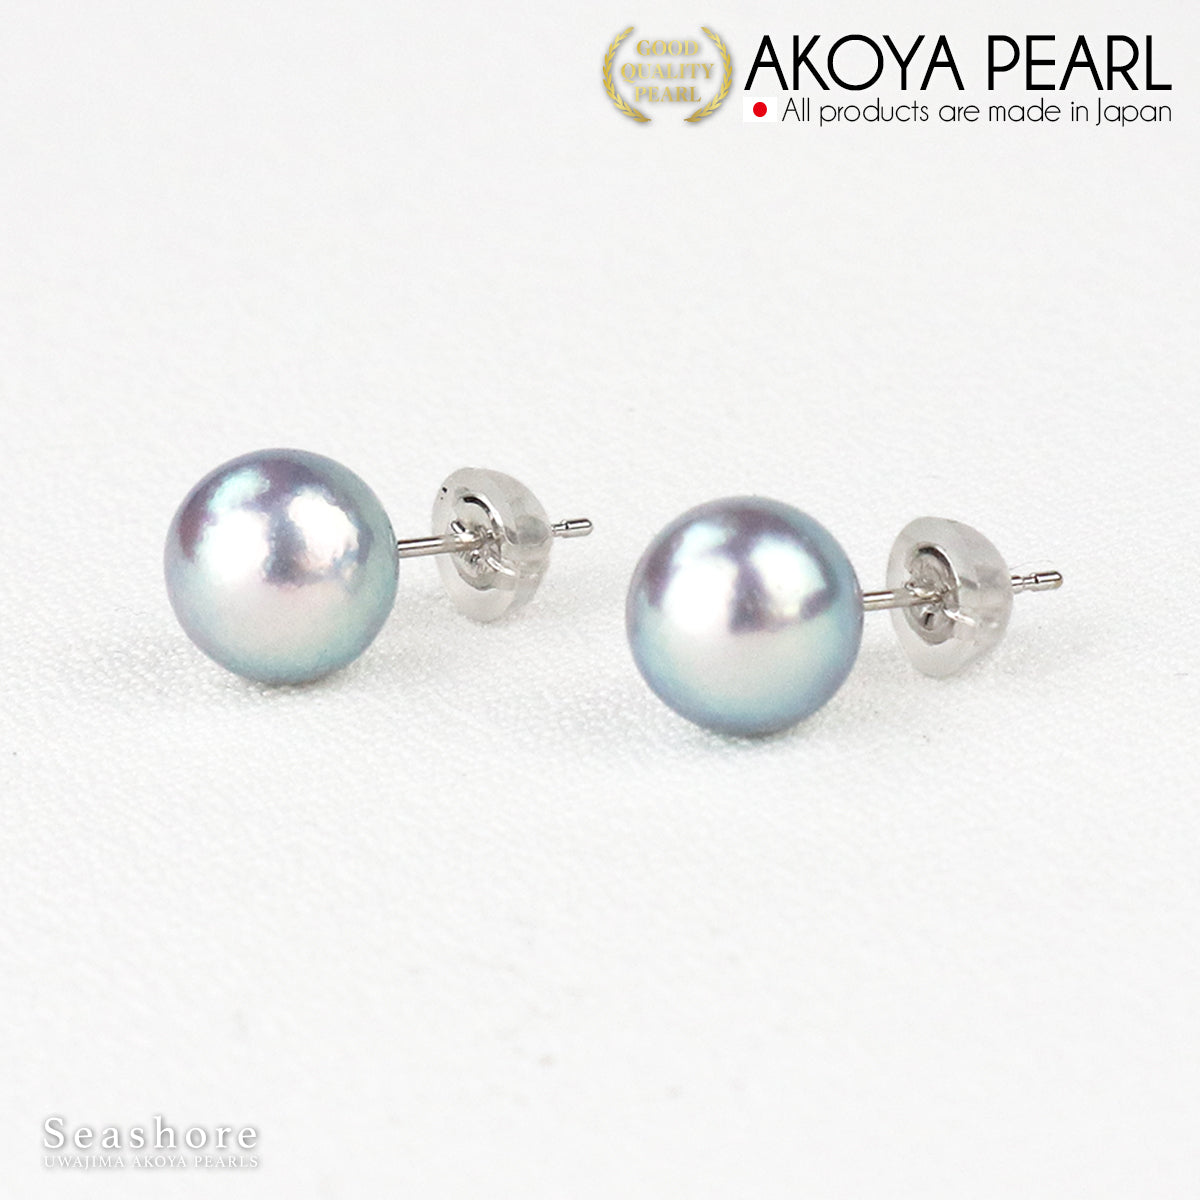 Pearl Earrings, Stud Type, Single Akoya Pearl, Women's [8.0-8.5mm] Free gift included, Storage case included, K14WG Natural Blue